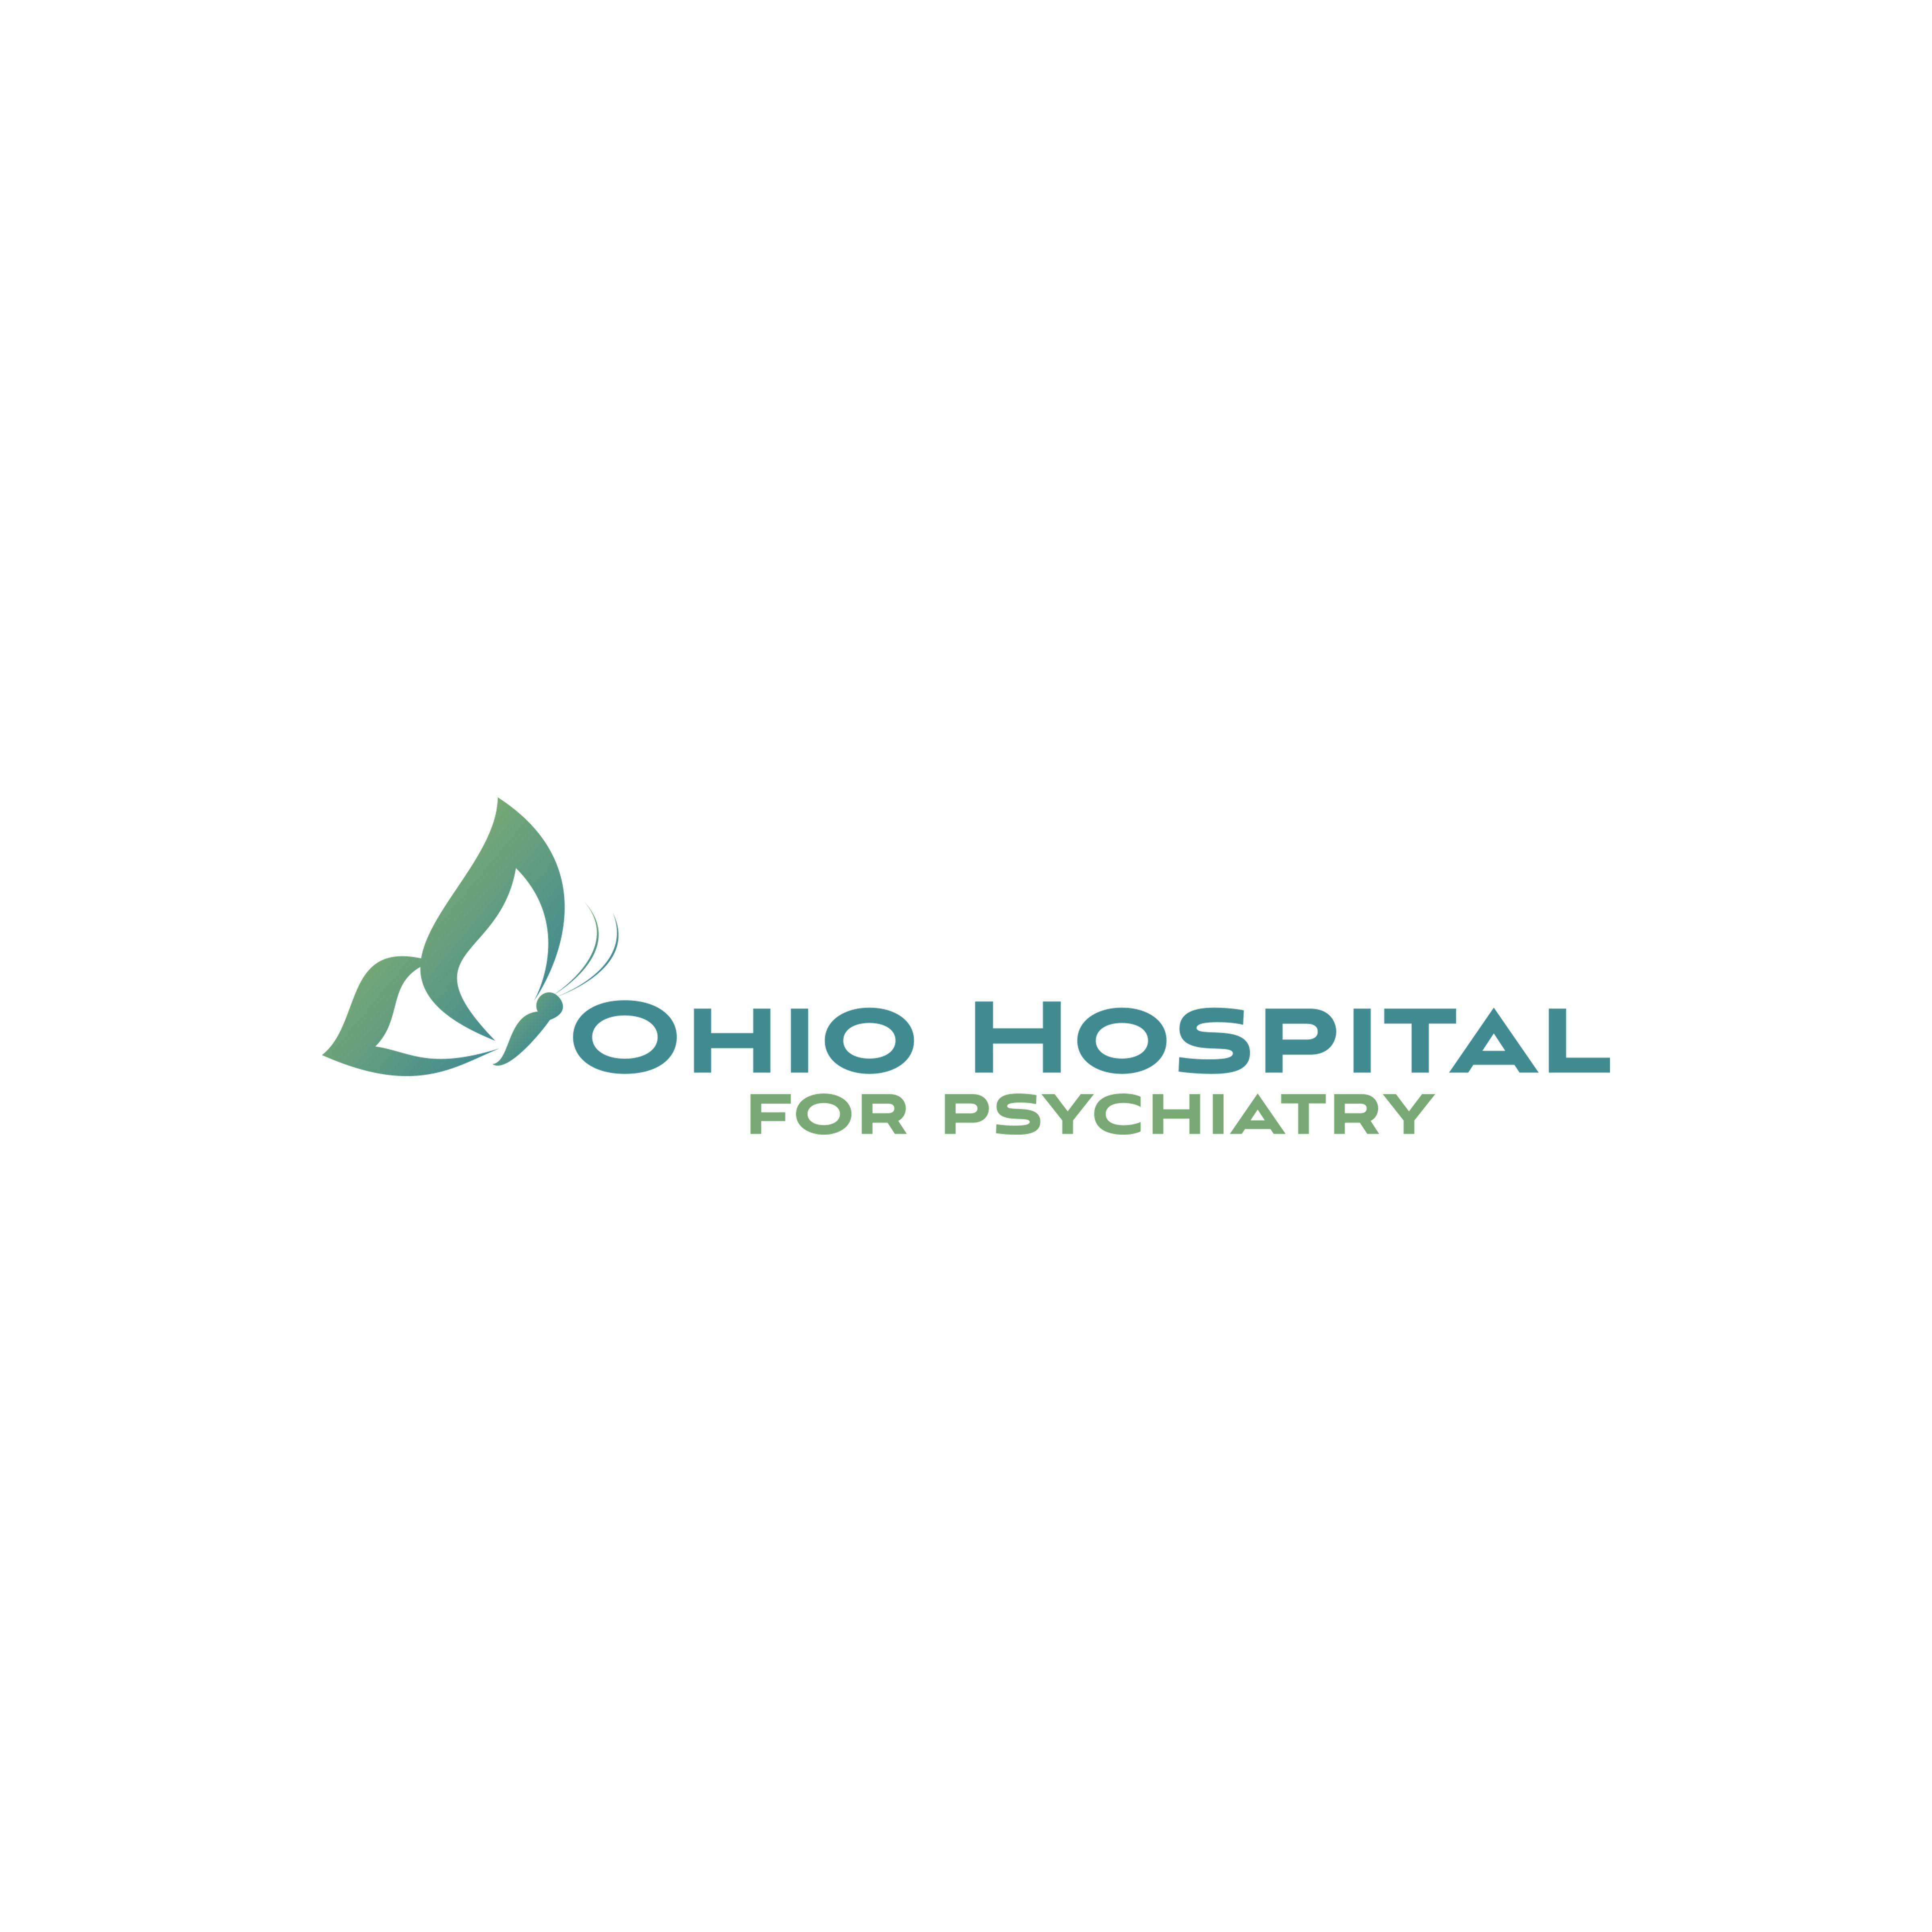 Ohio Hospital for Psychiatry - Outpatient Treatment - Columbus, OH 43223 - (614)896-5533 | ShowMeLocal.com